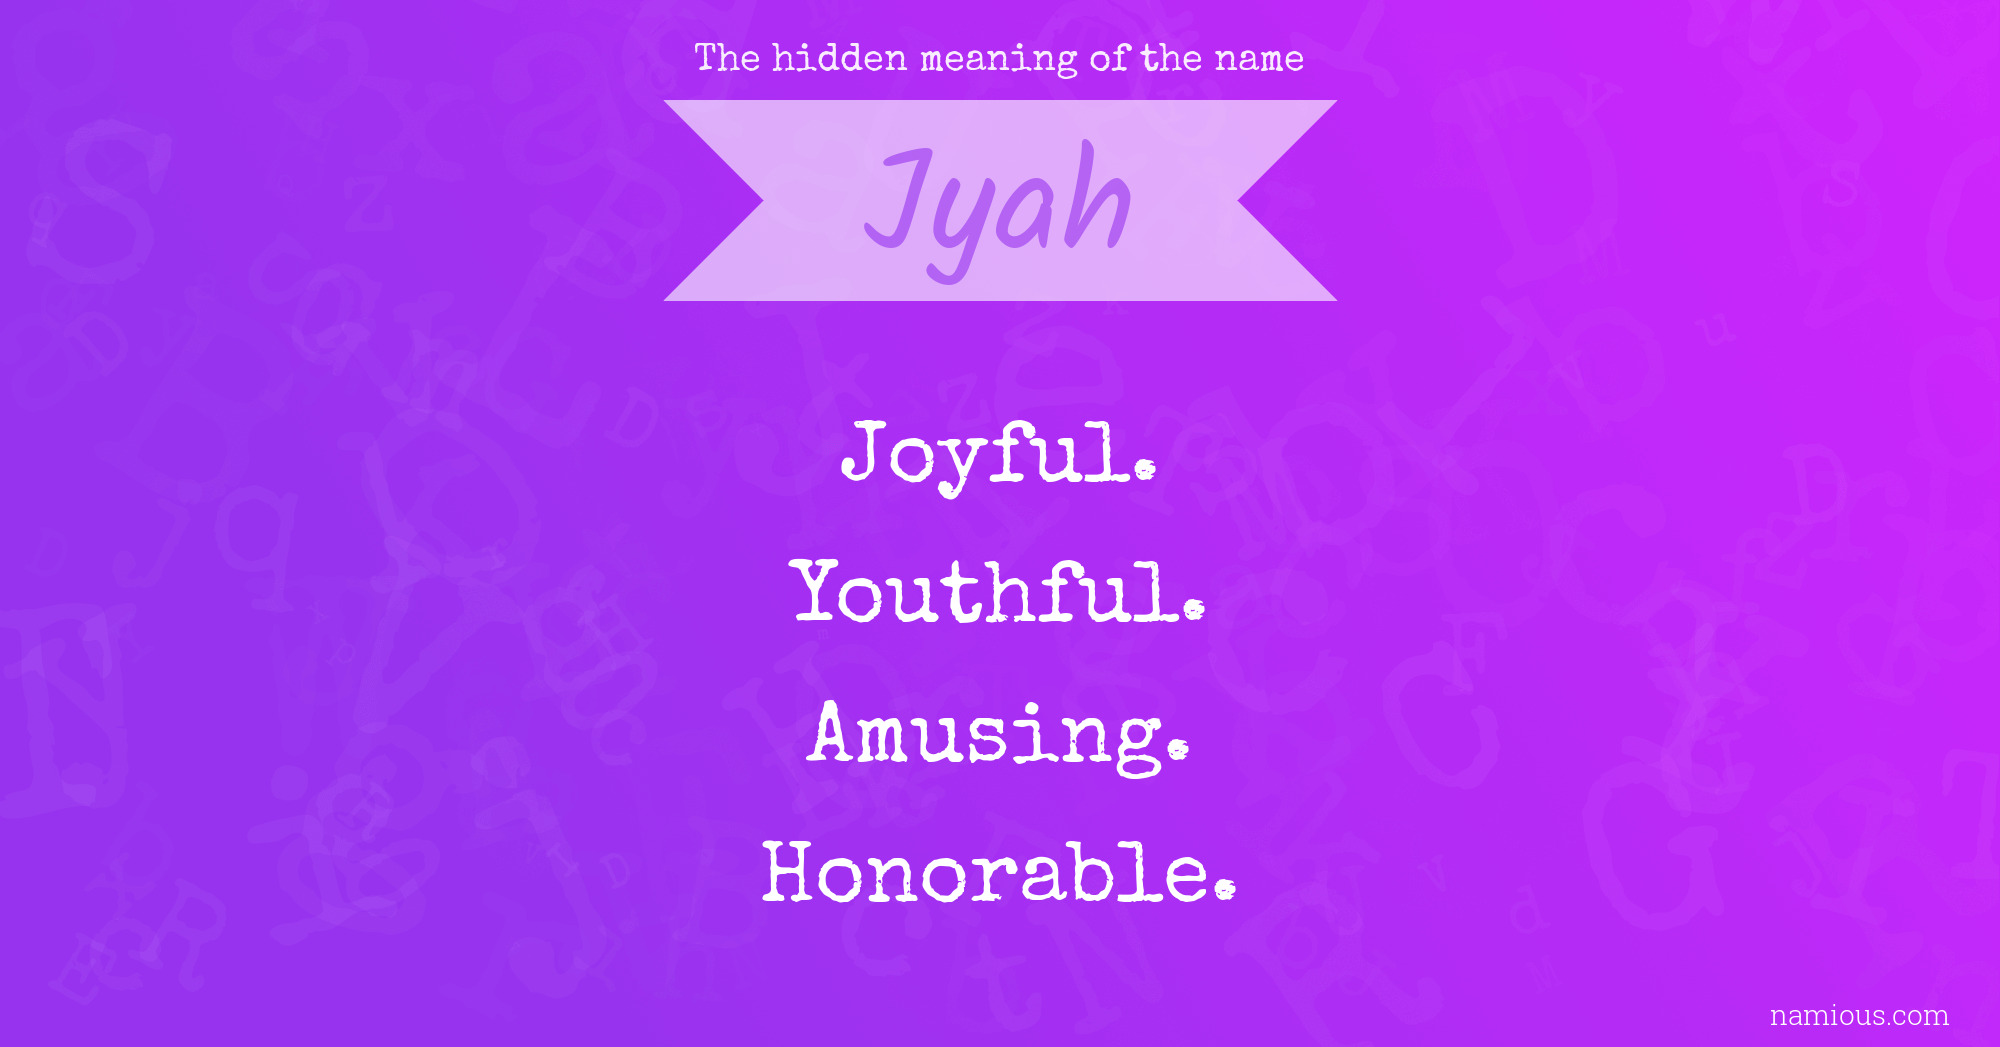 The hidden meaning of the name Jyah